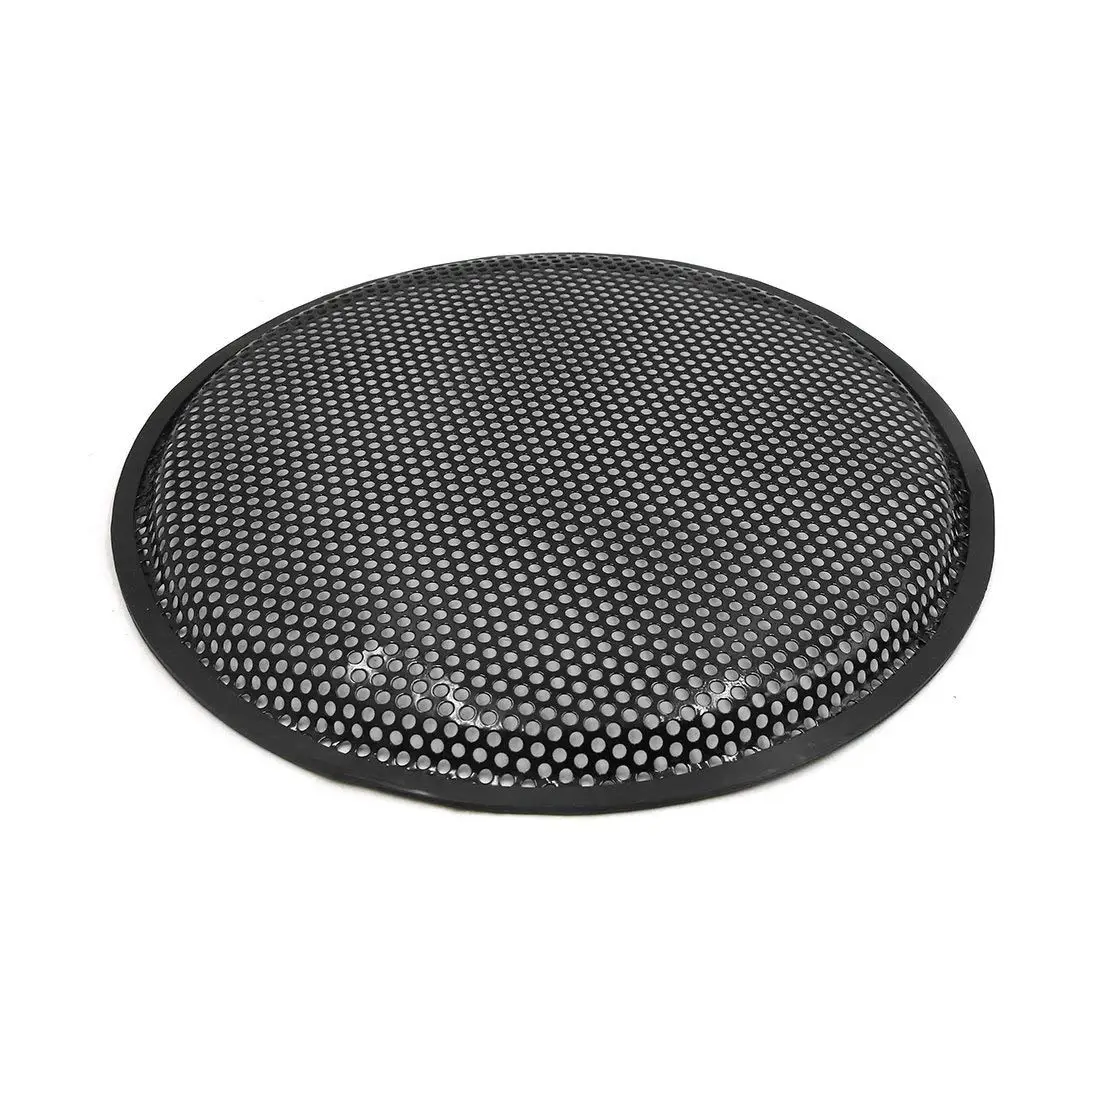 

uxcell 12" Stereo Metal Mesh Speaker Subwoofer Grill Cover Guard Protector for Car Stereo Audio Speaker Dust Cover